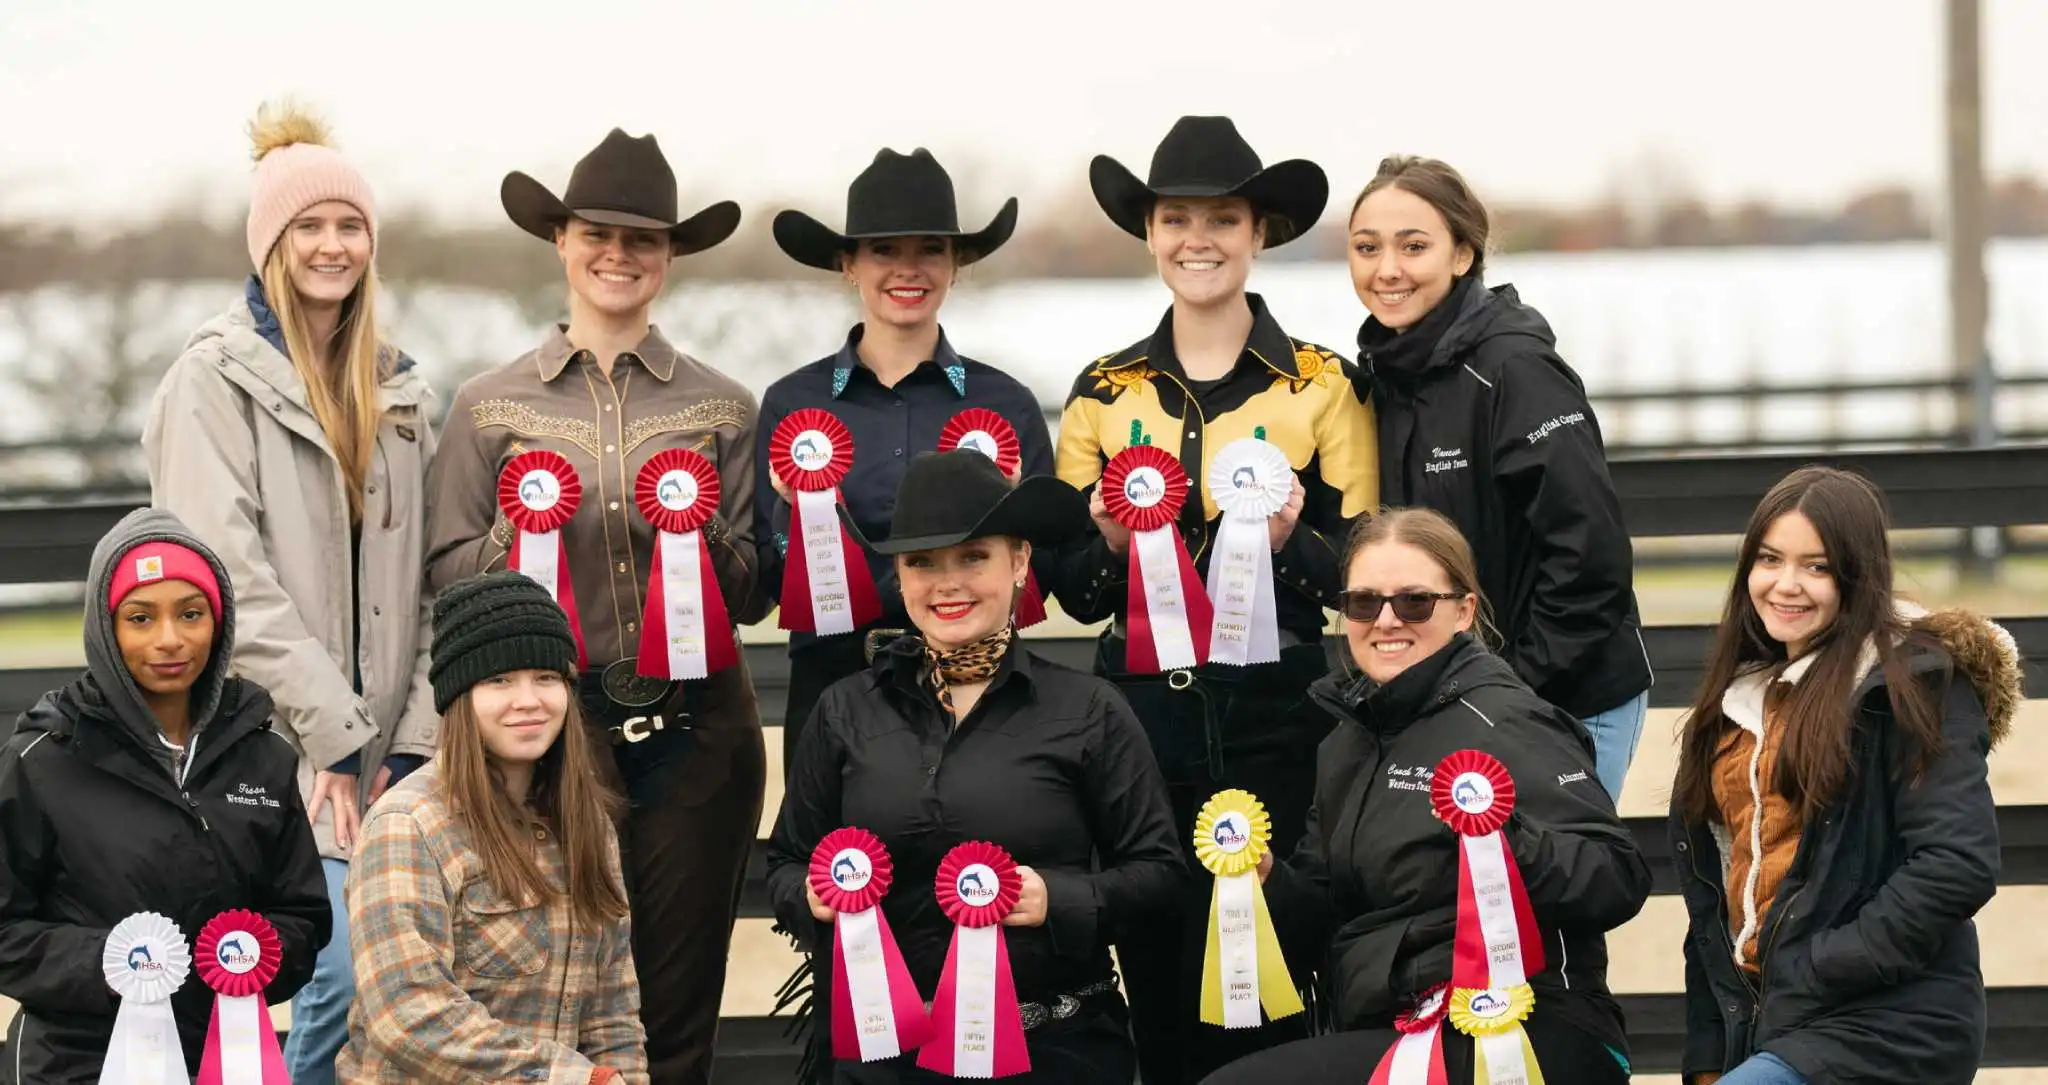 Arcadia's Equestrian Team posing with their award ribbons.